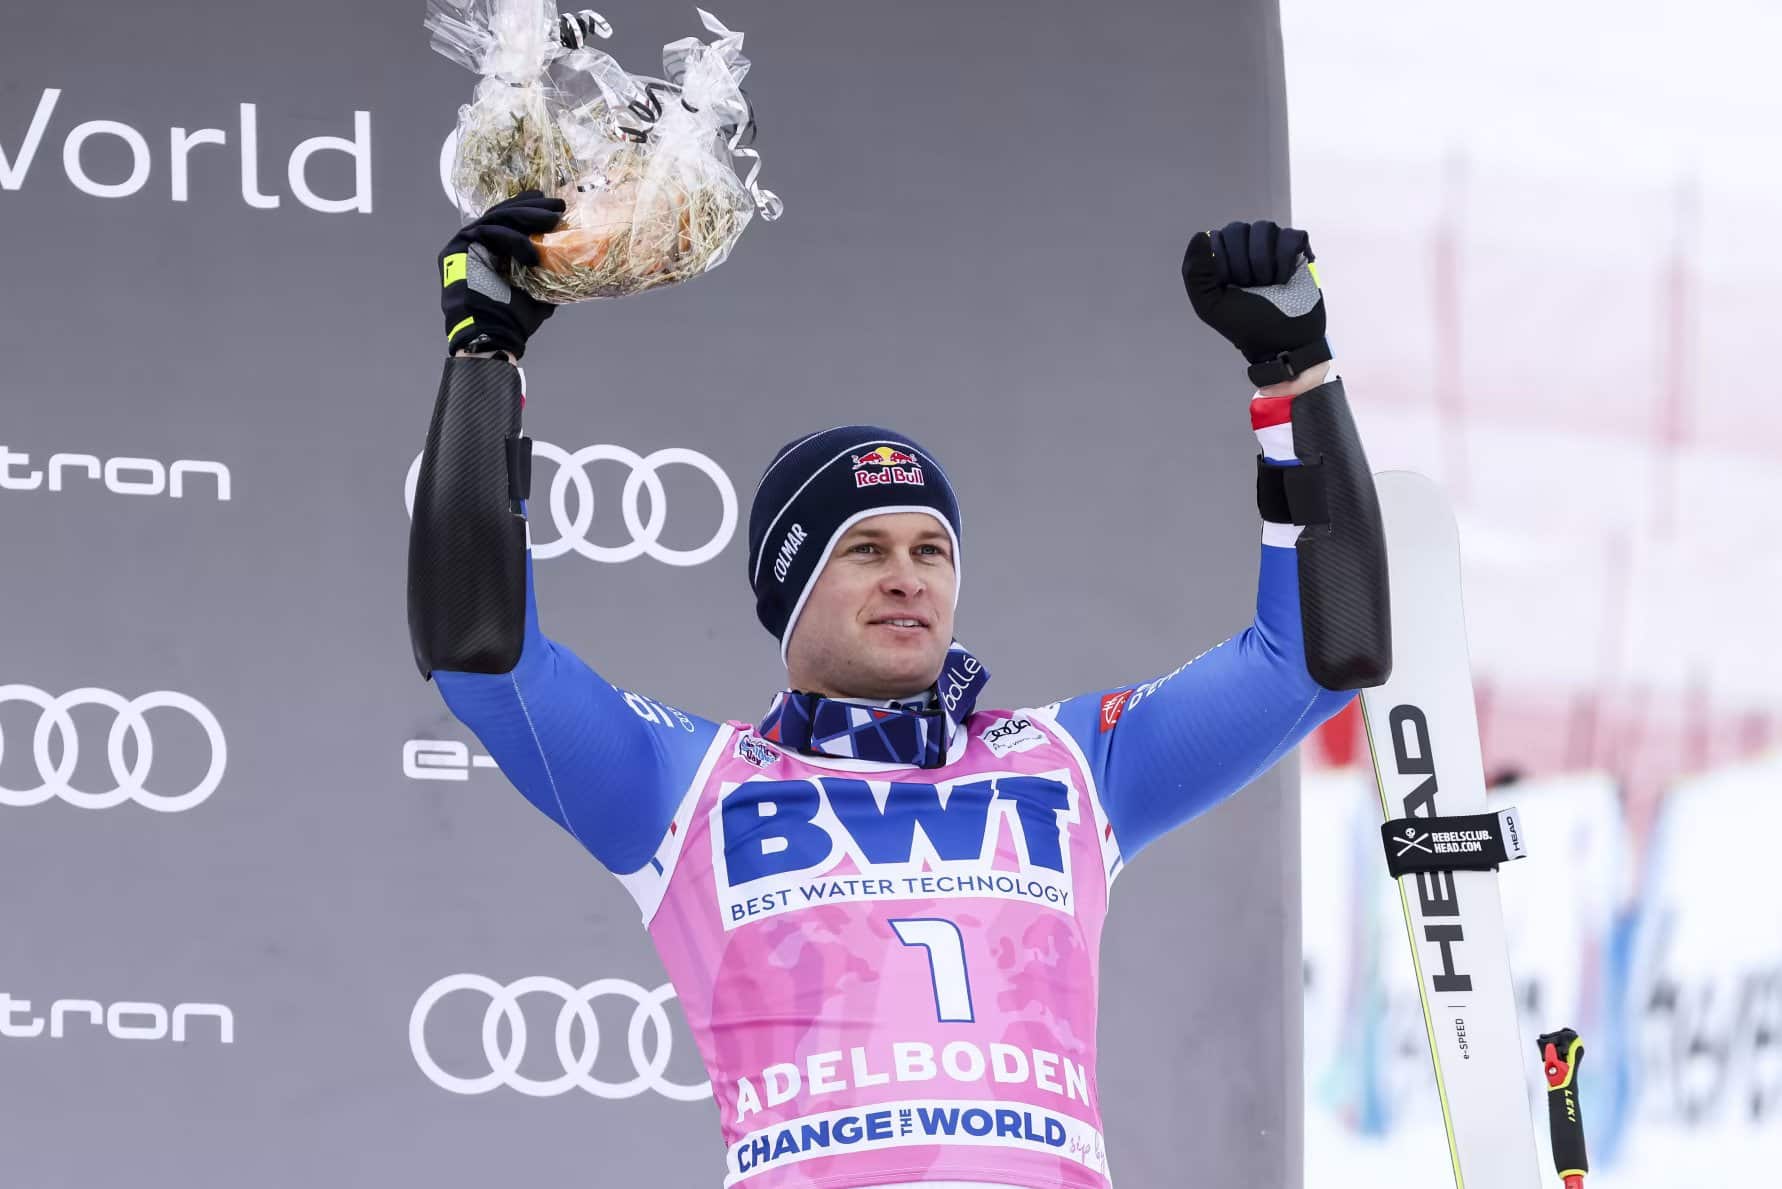 The world’s best ski team ready to defend title